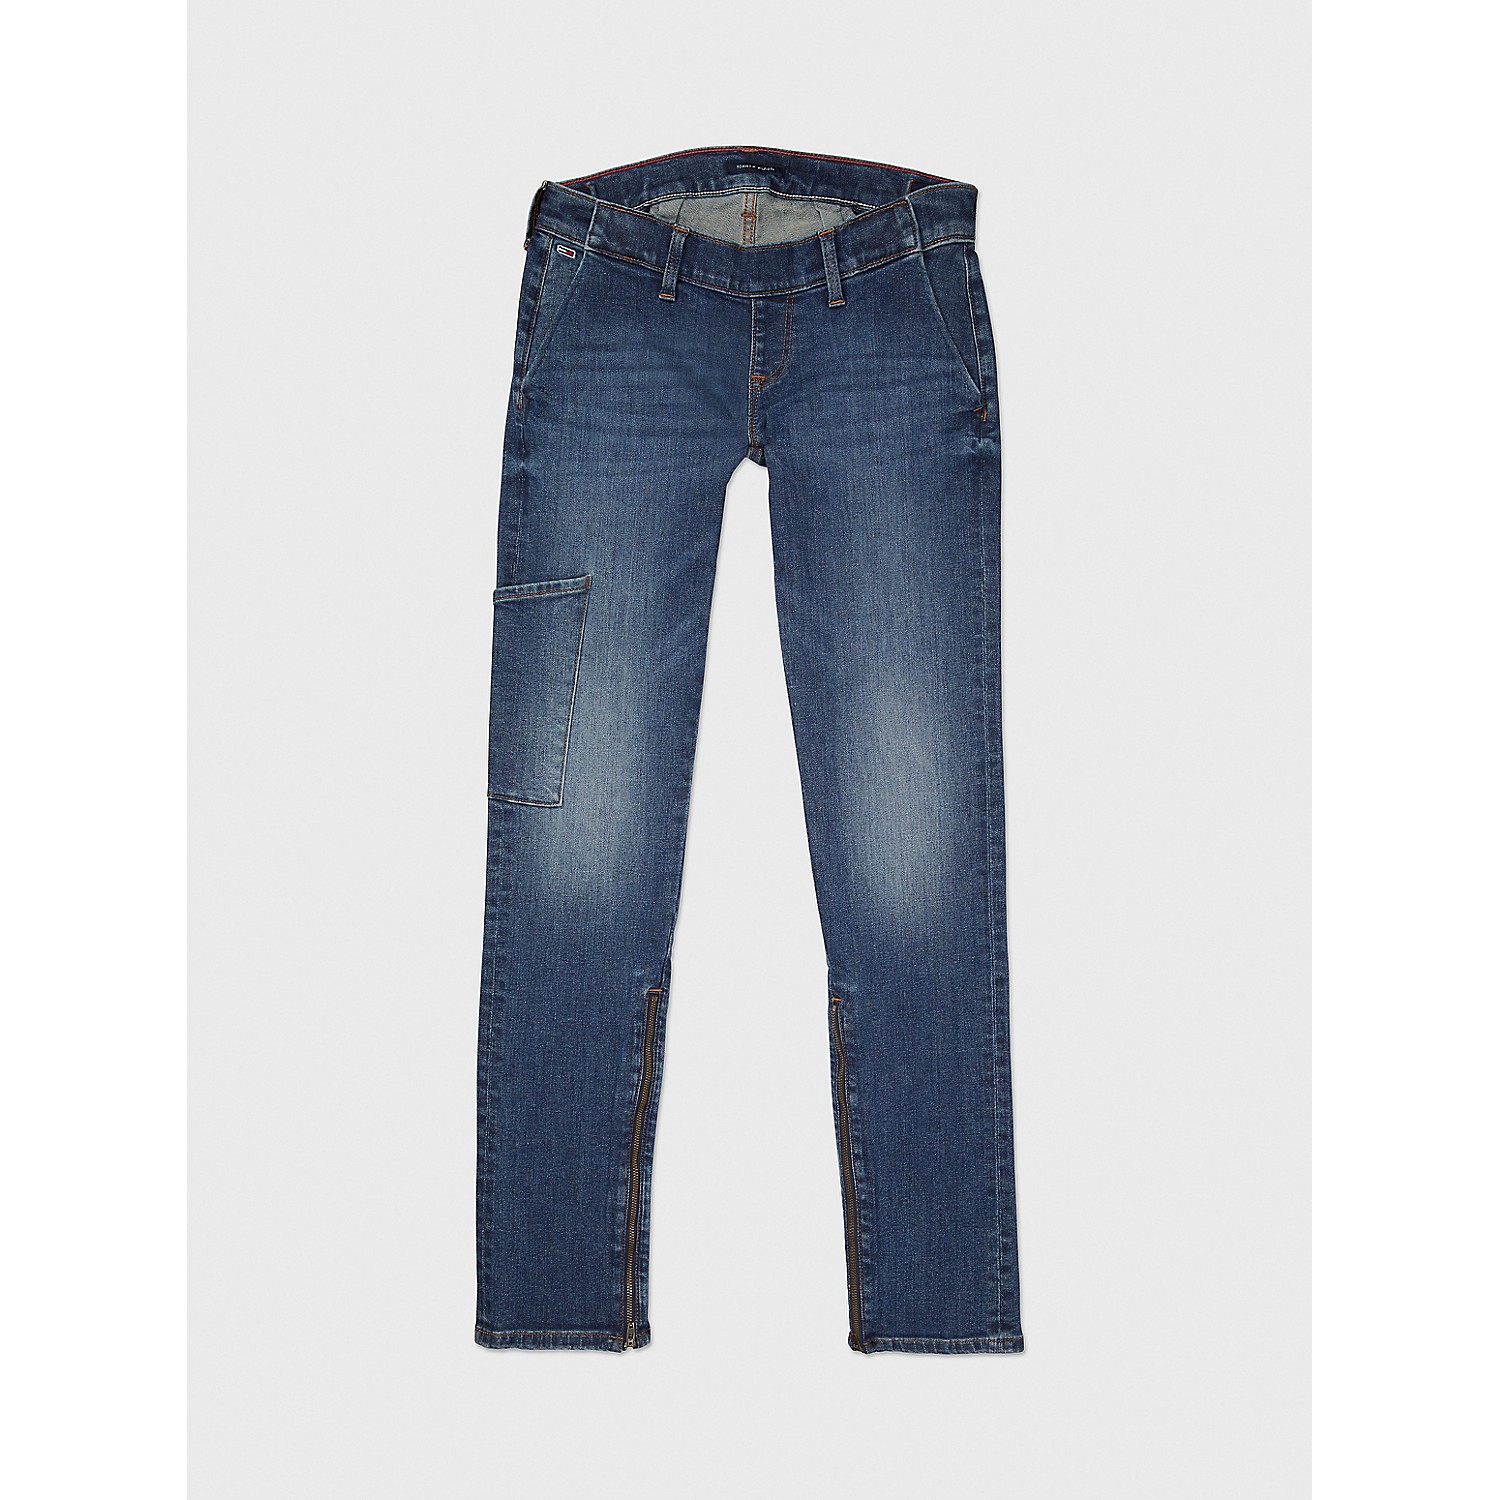 TOMMY HILFIGER Seated Fit Straight Jean